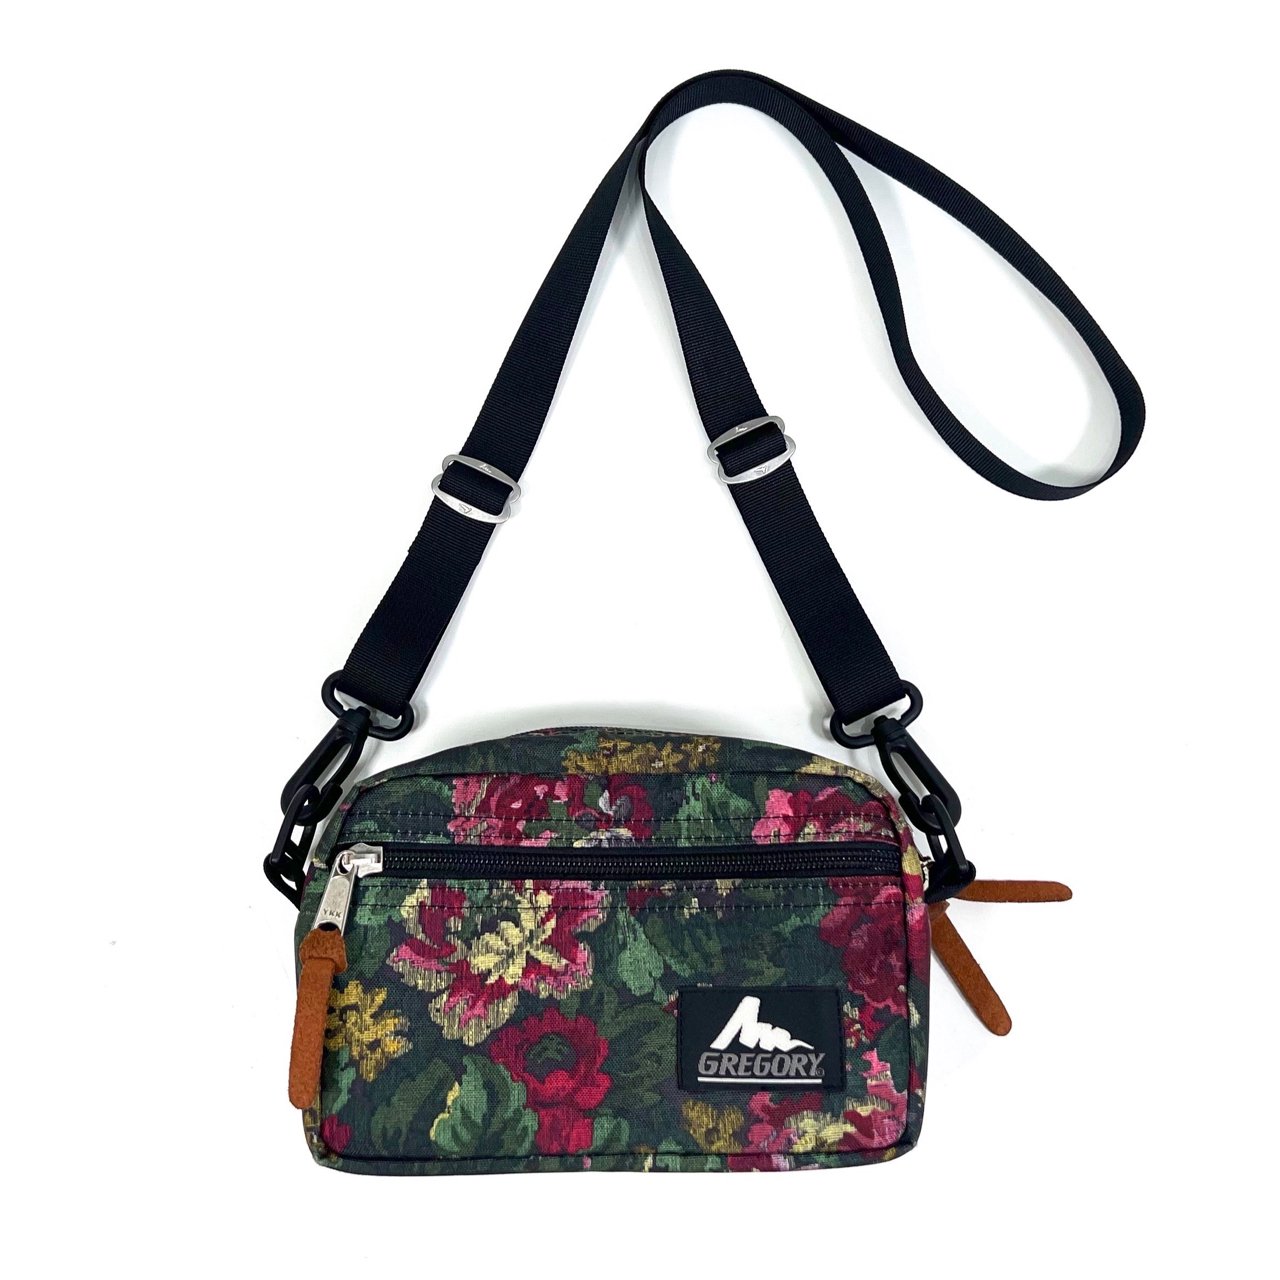 NOS 2010s GREGORY Padded Shoulder Pouch Floral tapestry